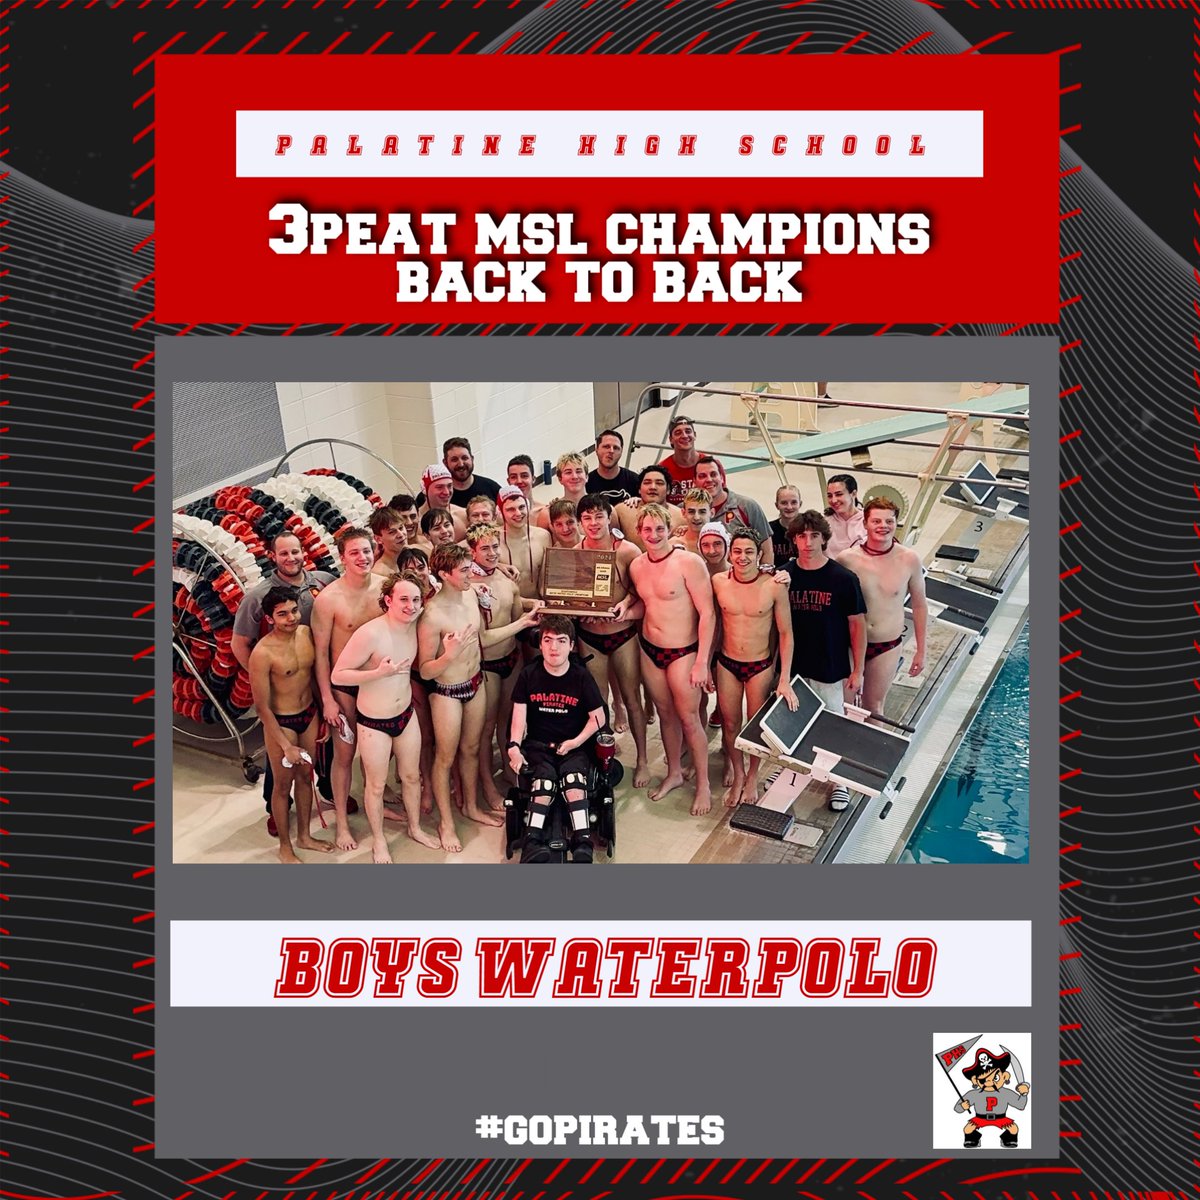 Congratulations to Joe Grzybek and his team on their amazing accomplishment of winning the MSL conference championship three times in a row!! Go Pirates!